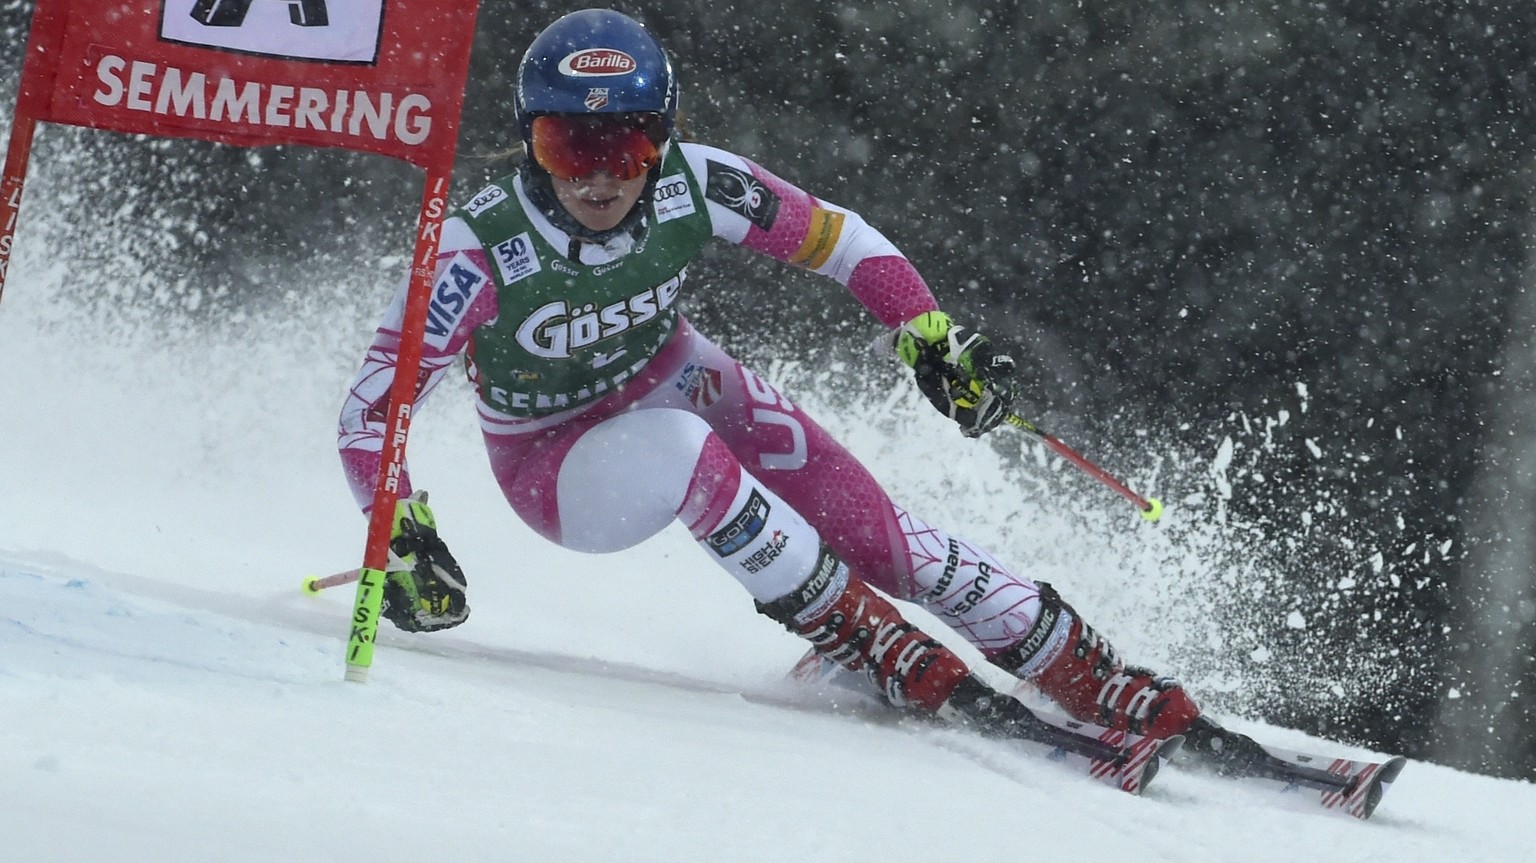 United States&#039;s Mikaela Shiffrin speeds down the course during the first run of an alpine ski, womens&#039; World Cup Giant Slalom, in Semmering, Austria, Wednesday, Dec. 28, 2016. (AP Photo/Marc ...